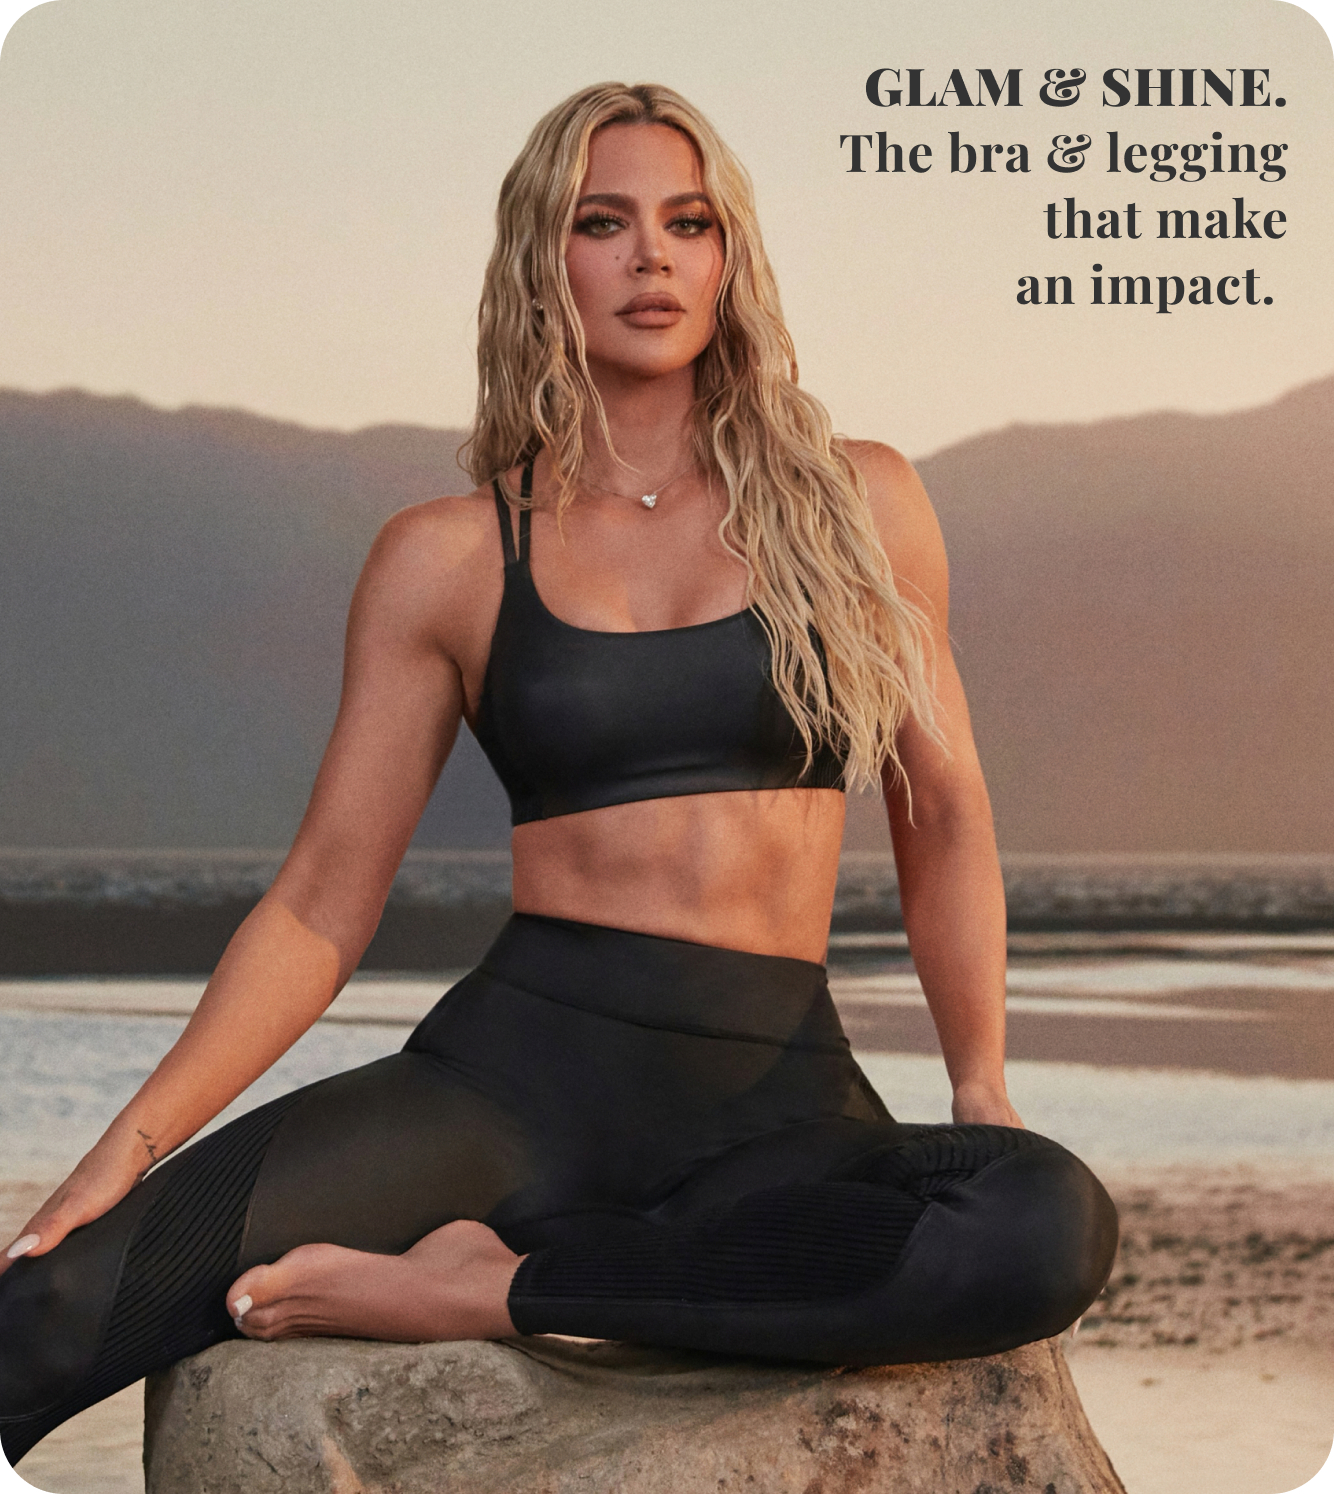 Khloé Kardashian's New Activewear Collection With